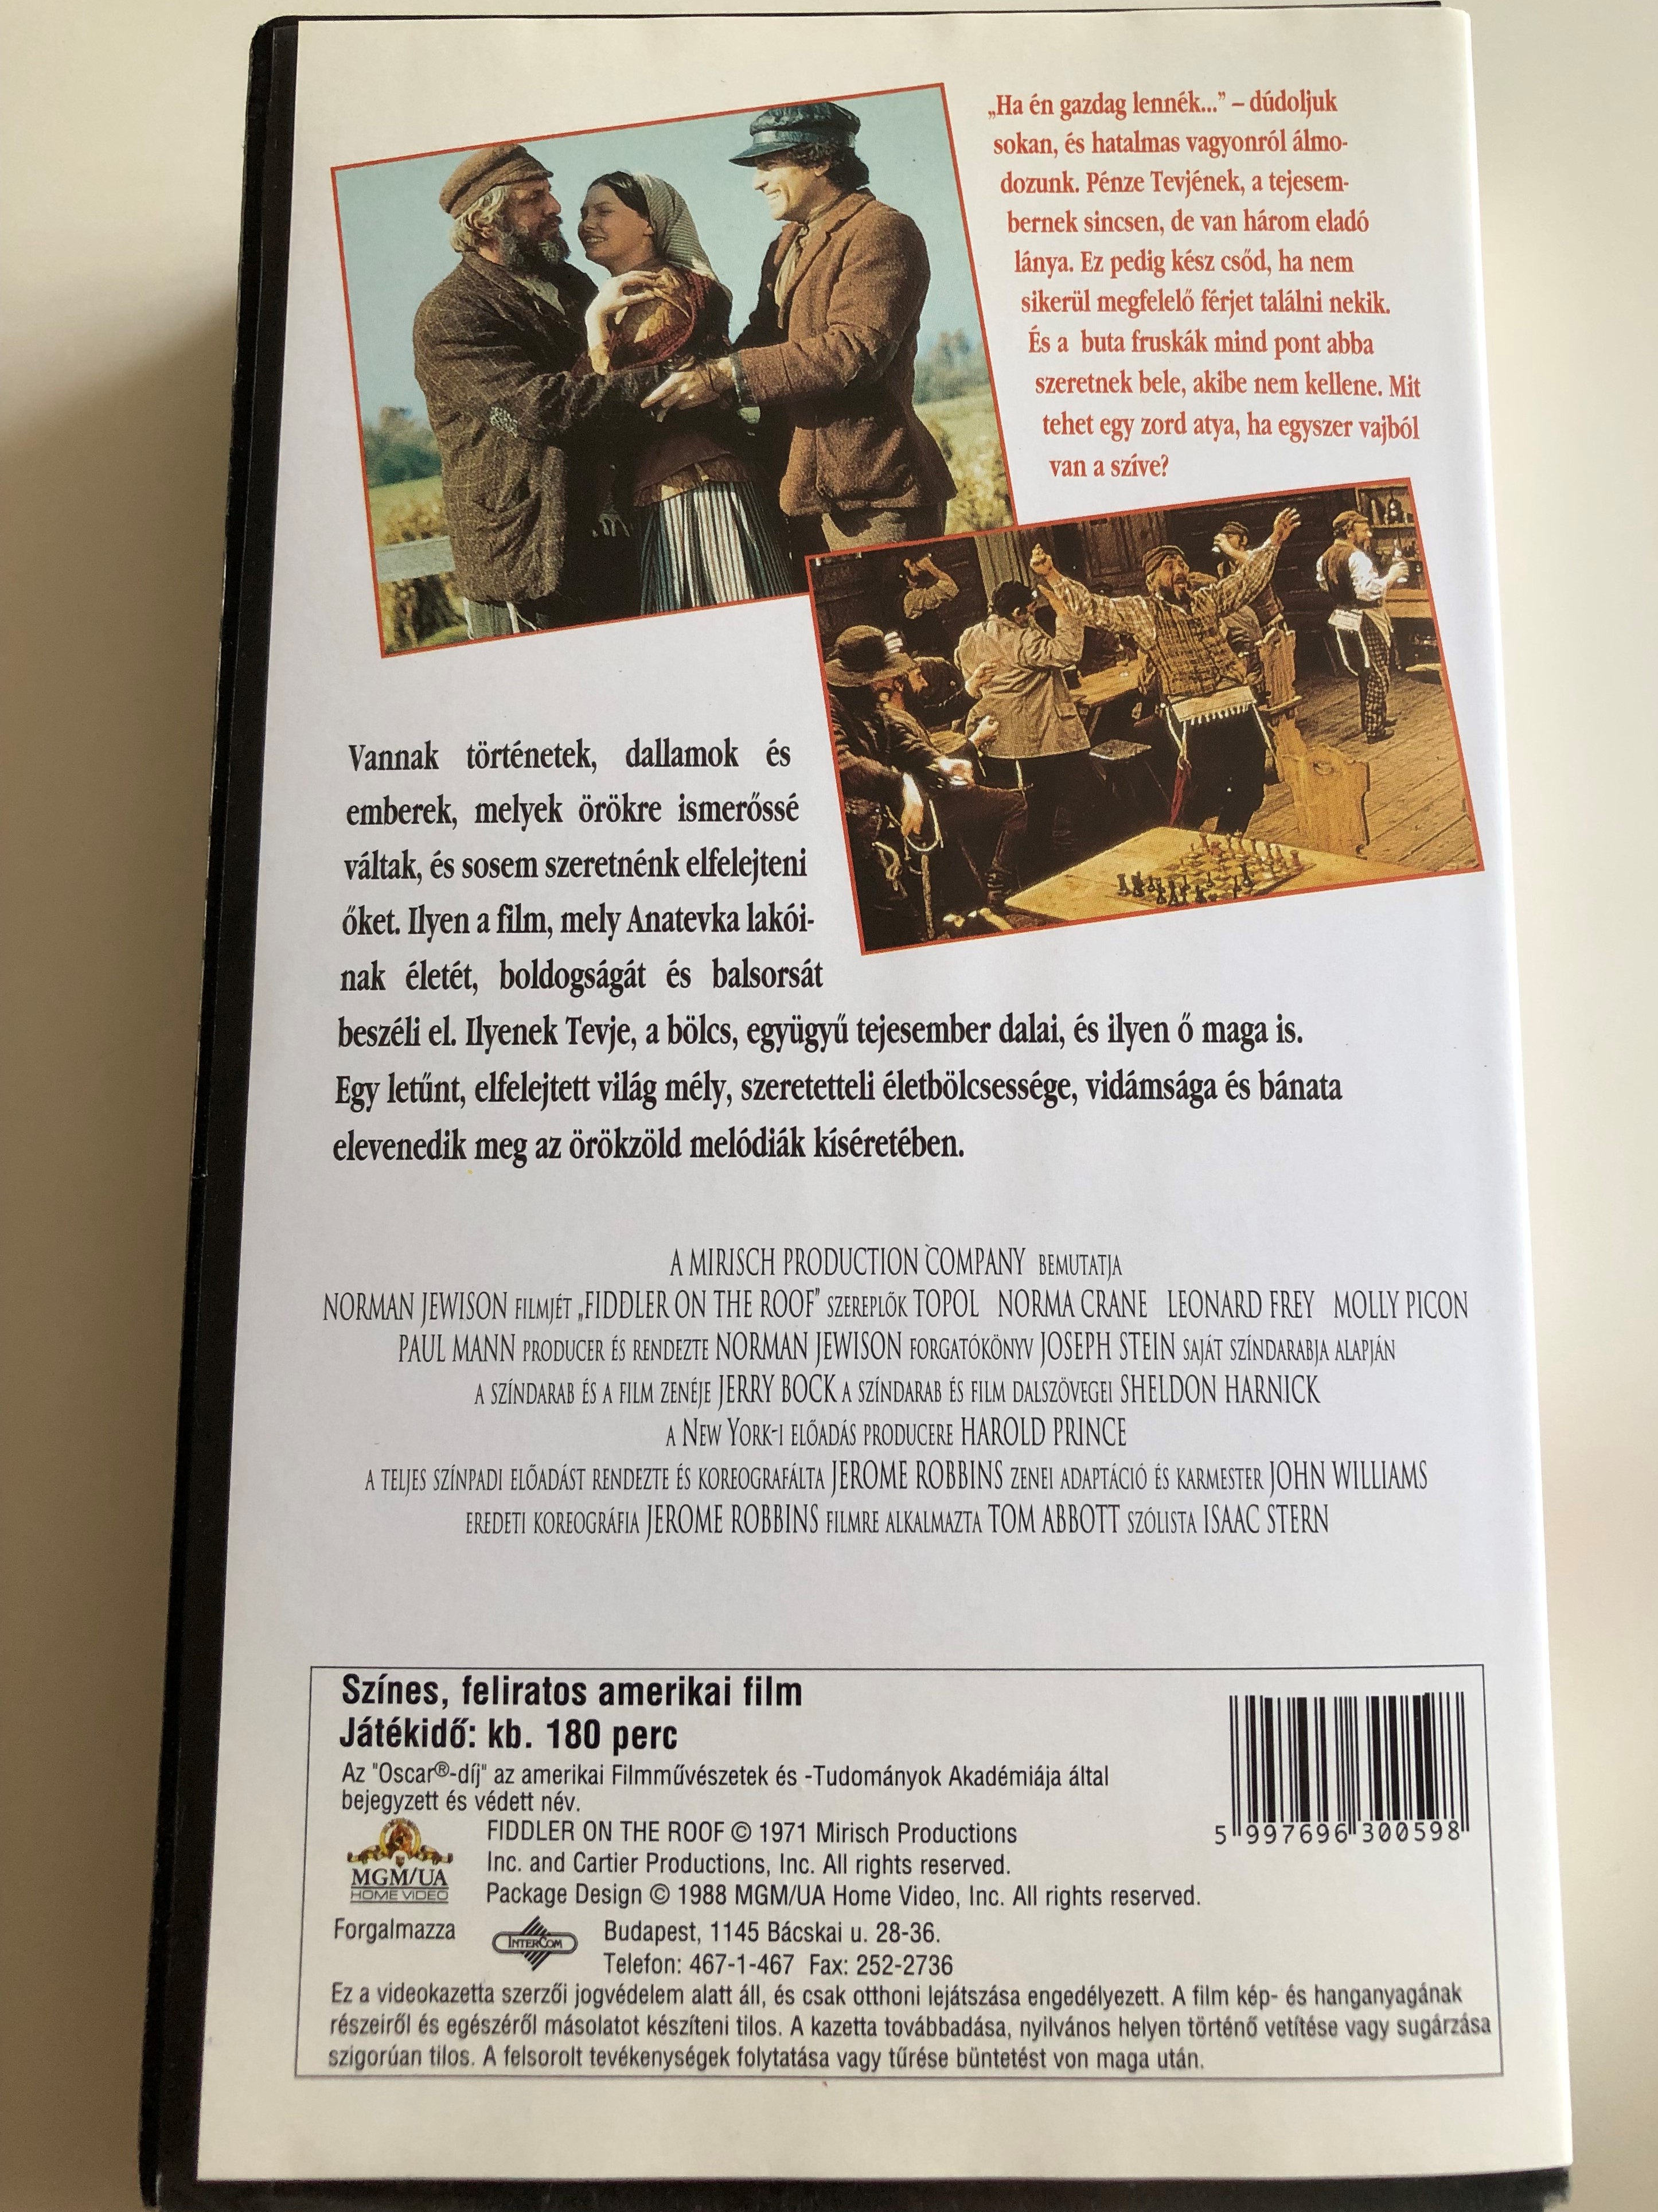 fiddler-on-the-roof-vhs-1971-heged-s-a-h-ztet-n-directed-by-norman-jewison-starring-topol-norma-crane-leonard-frey-molly-picon-paul-mann-2-.jpg